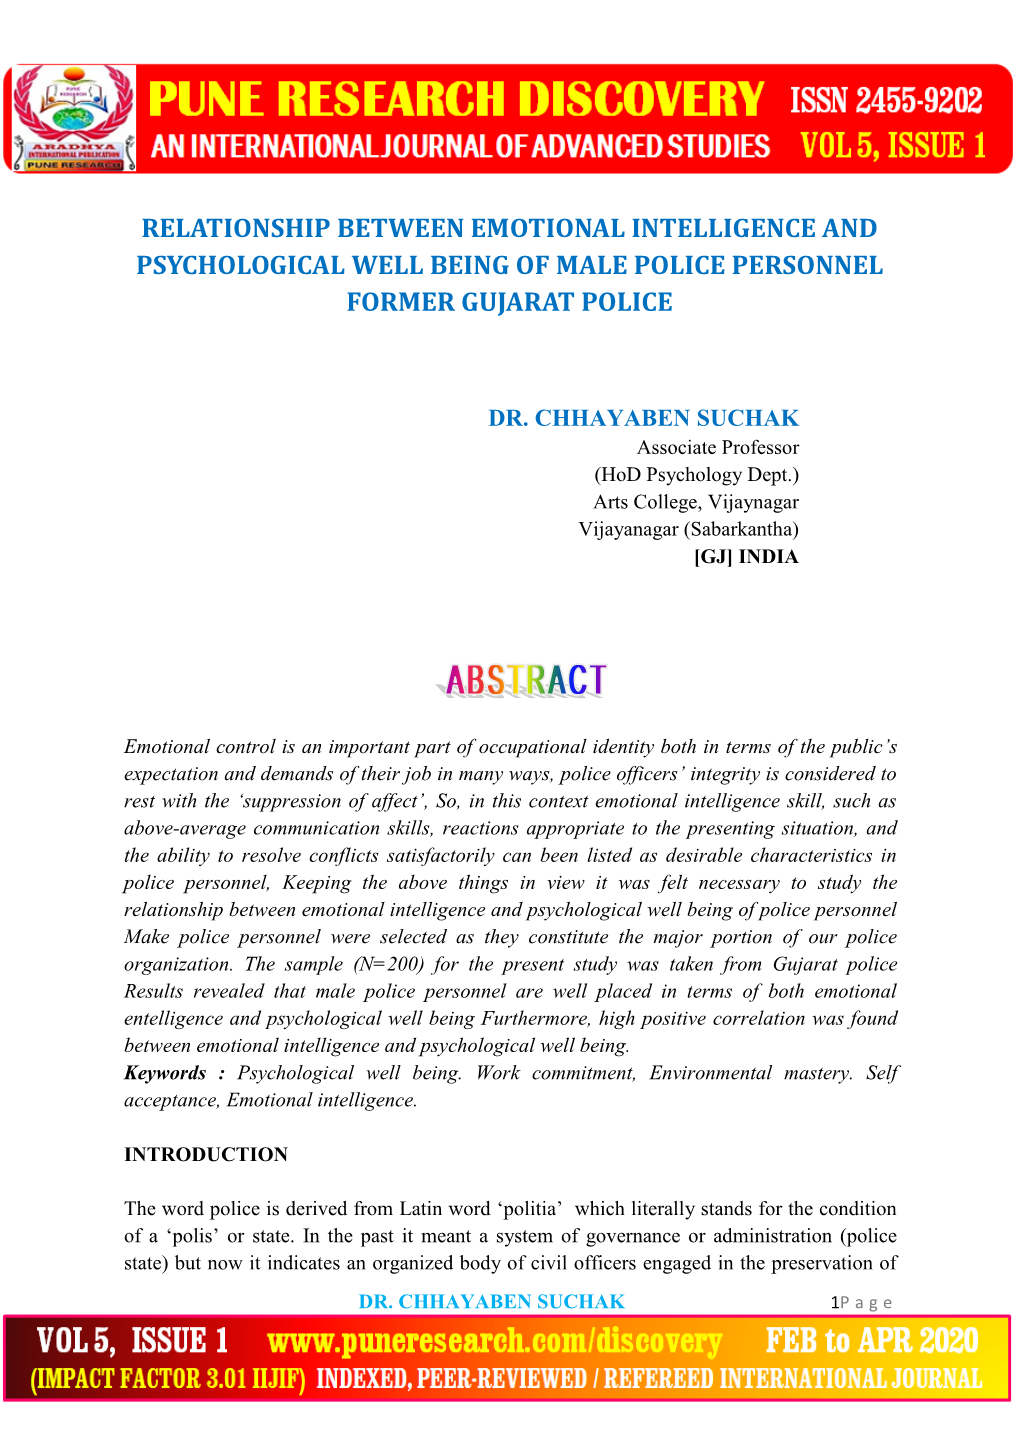 Relationship Between Emotional Intelligence and Psychological Well Being of Male Police Personnel Former Gujarat Police